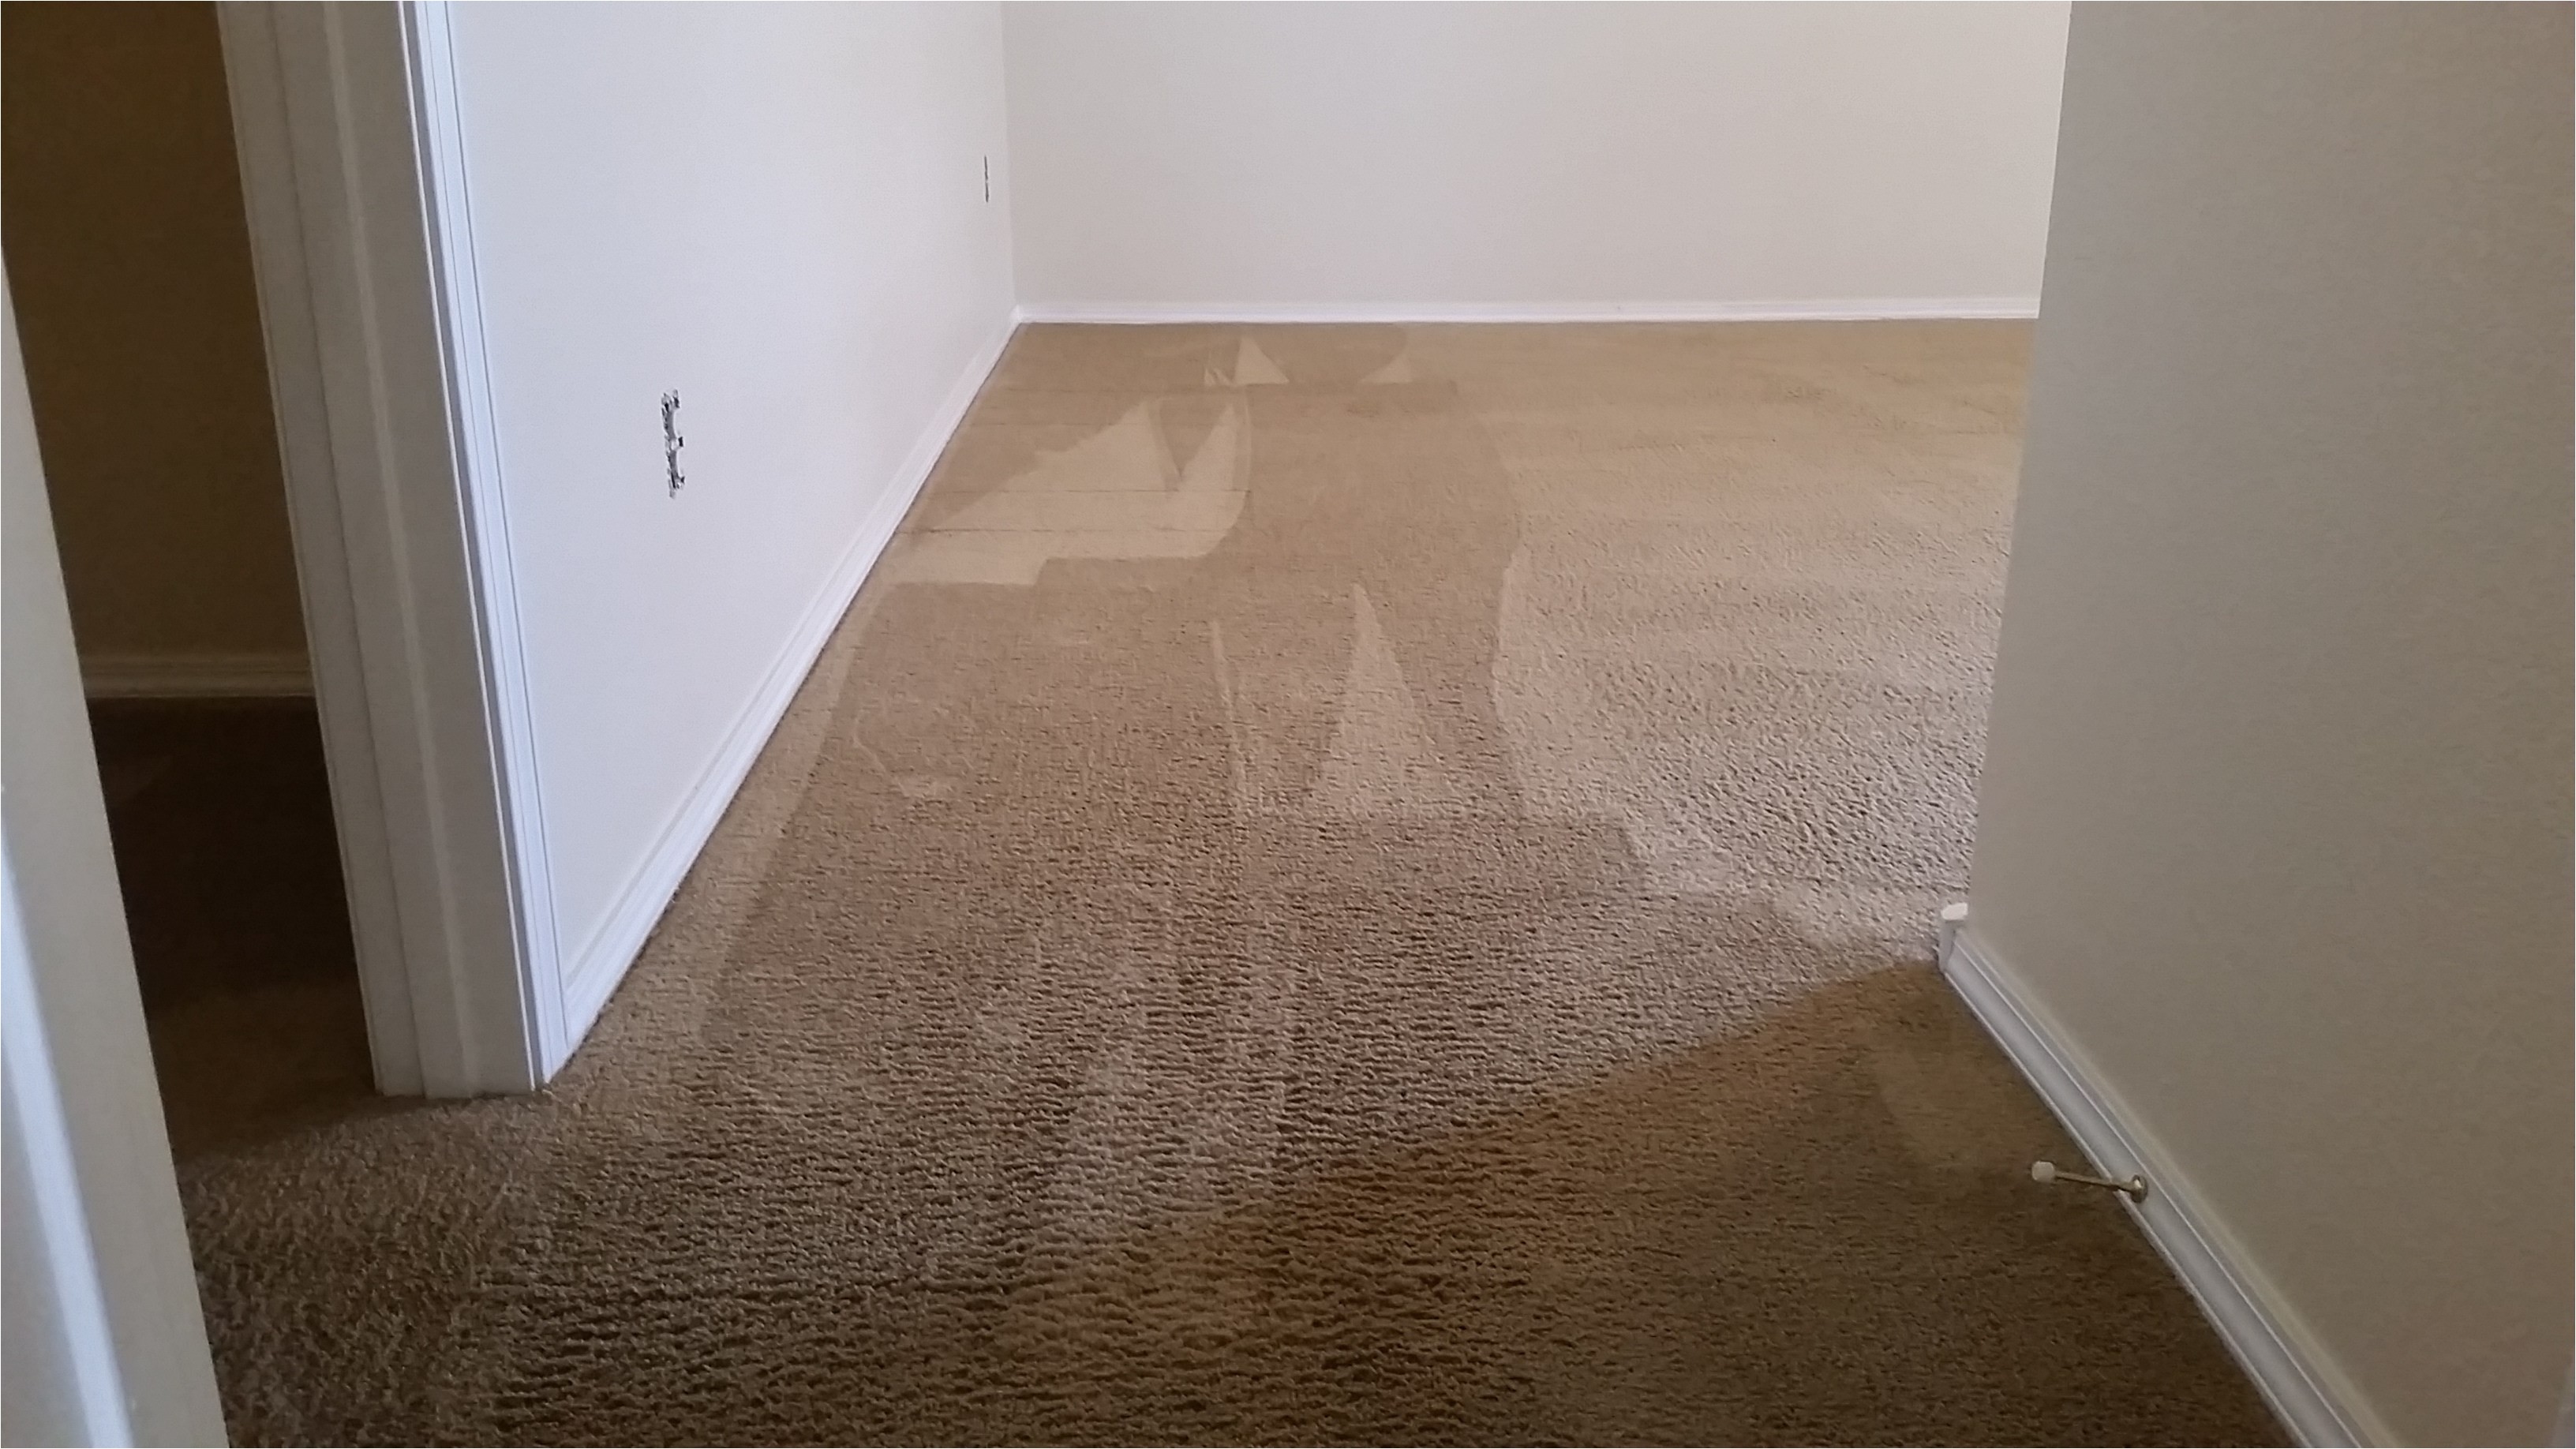 Carpet Cleaners Rio Rancho Rio Rancho Carpet Stretch and Cleaning Carpet Repair